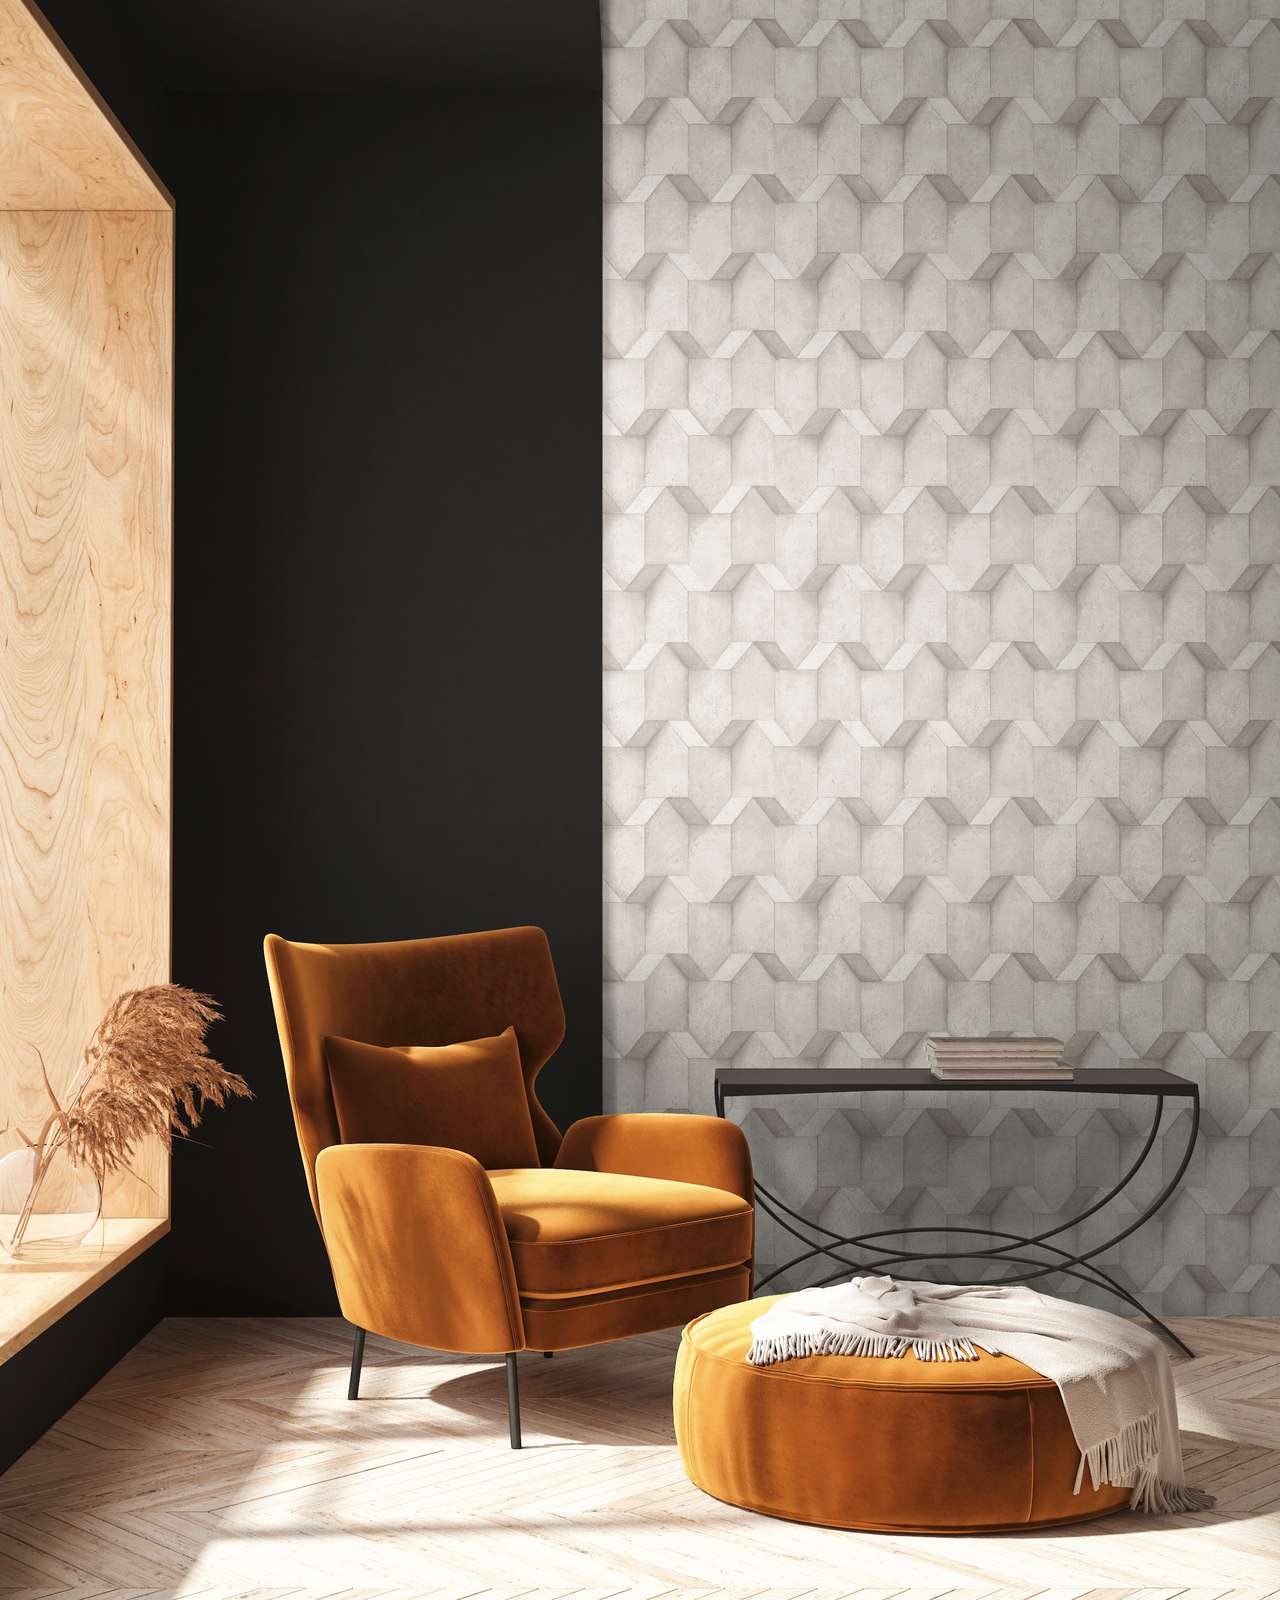             3D wallpaper limestone with structure design - white, grey
        